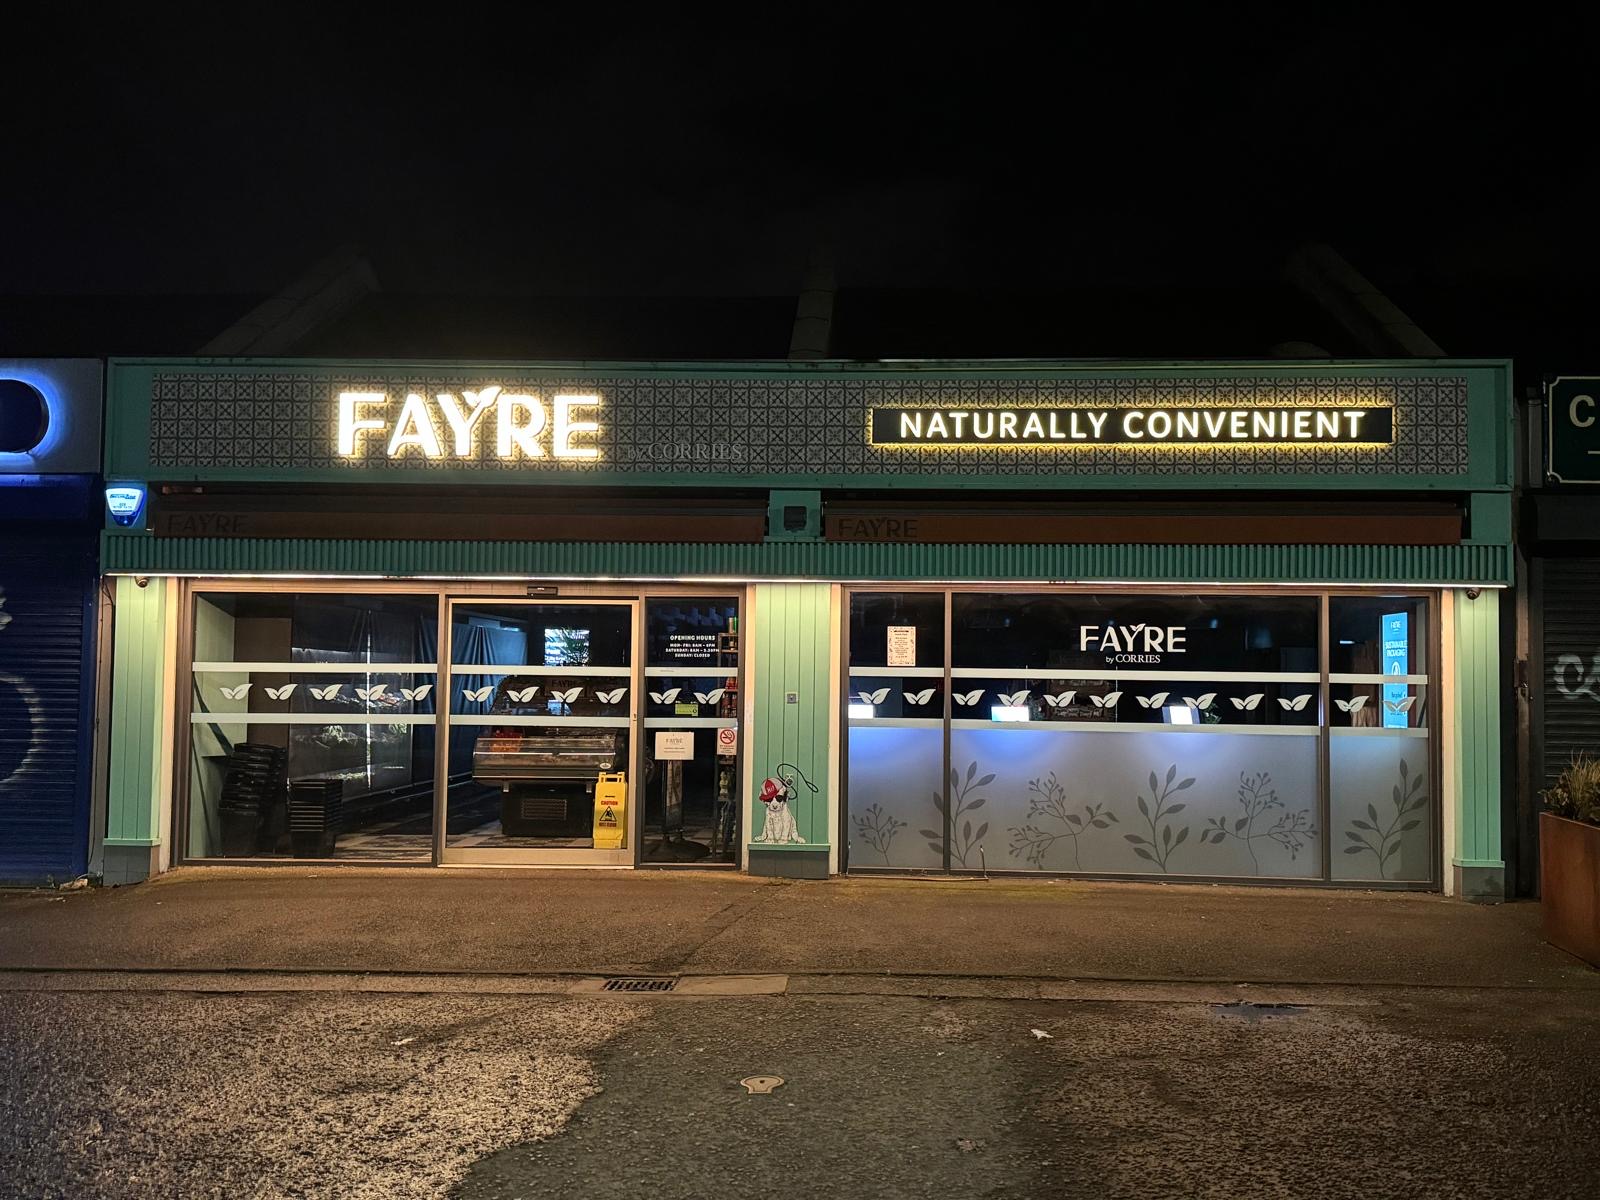 Creative signage of Fayre by Corries